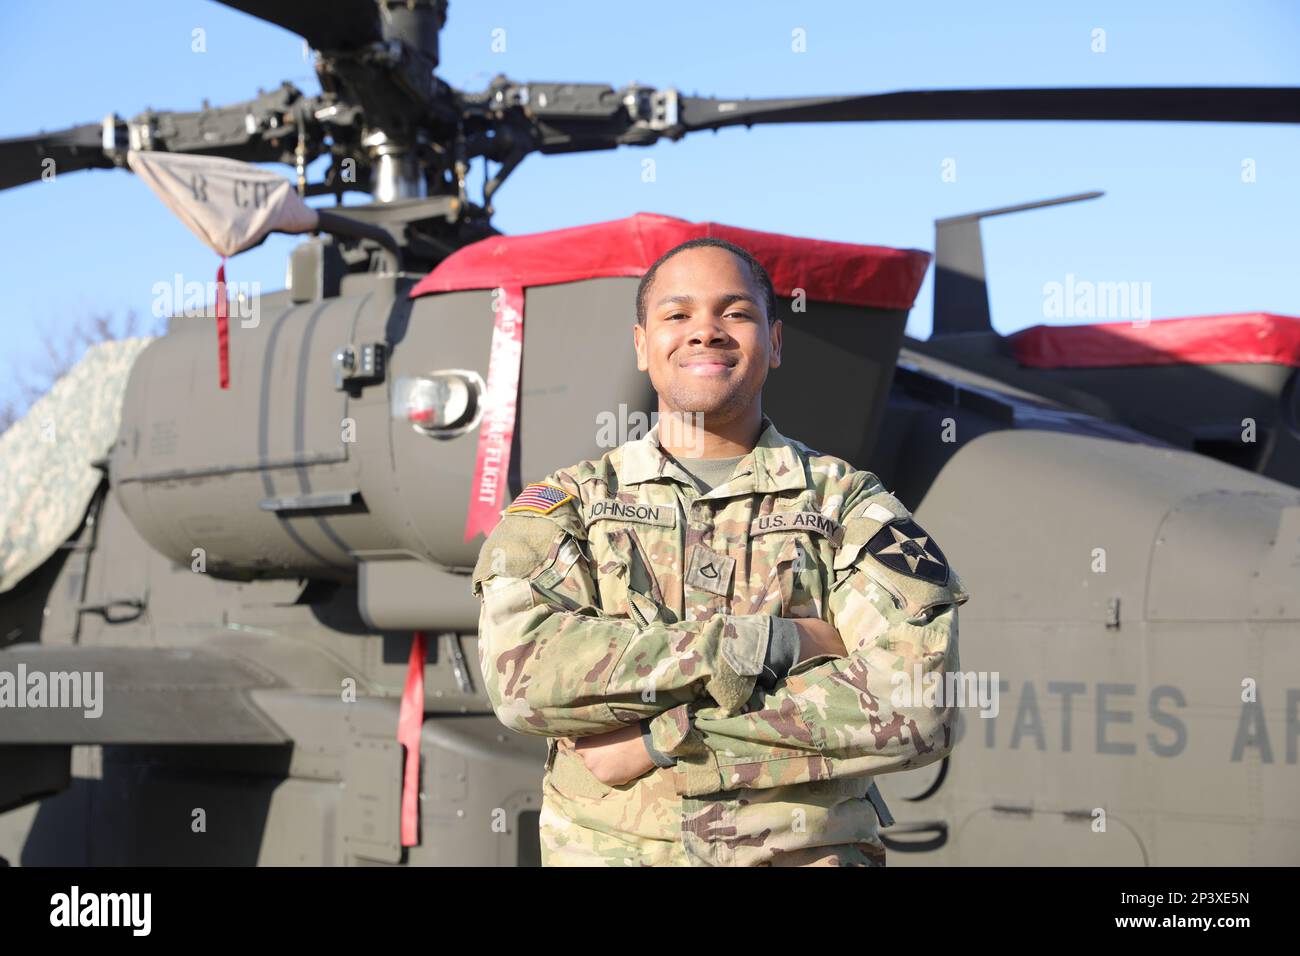 February is Black History Month and we asked our Soldiers 'Why is diversity important in the U.S. Army?'    “Diversity in the Army is crucial because it allows us to have a larger, more well-rounded team,' said Pfc. Allen Johnson, 15R AH-64 Attack Helicopter Repairer, C Company, 4th Battalion, 2nd Aviation Regiment, 2nd Combat Aviation Brigade, 2nd Infantry Division/ROK-U.S. Combined Division from Tampa, Florida. 'Everyone brings their own unique strengths and weaknesses, and with diversity, we can bring all of these different qualities together. This leads to a more diverse group of individua Stock Photo